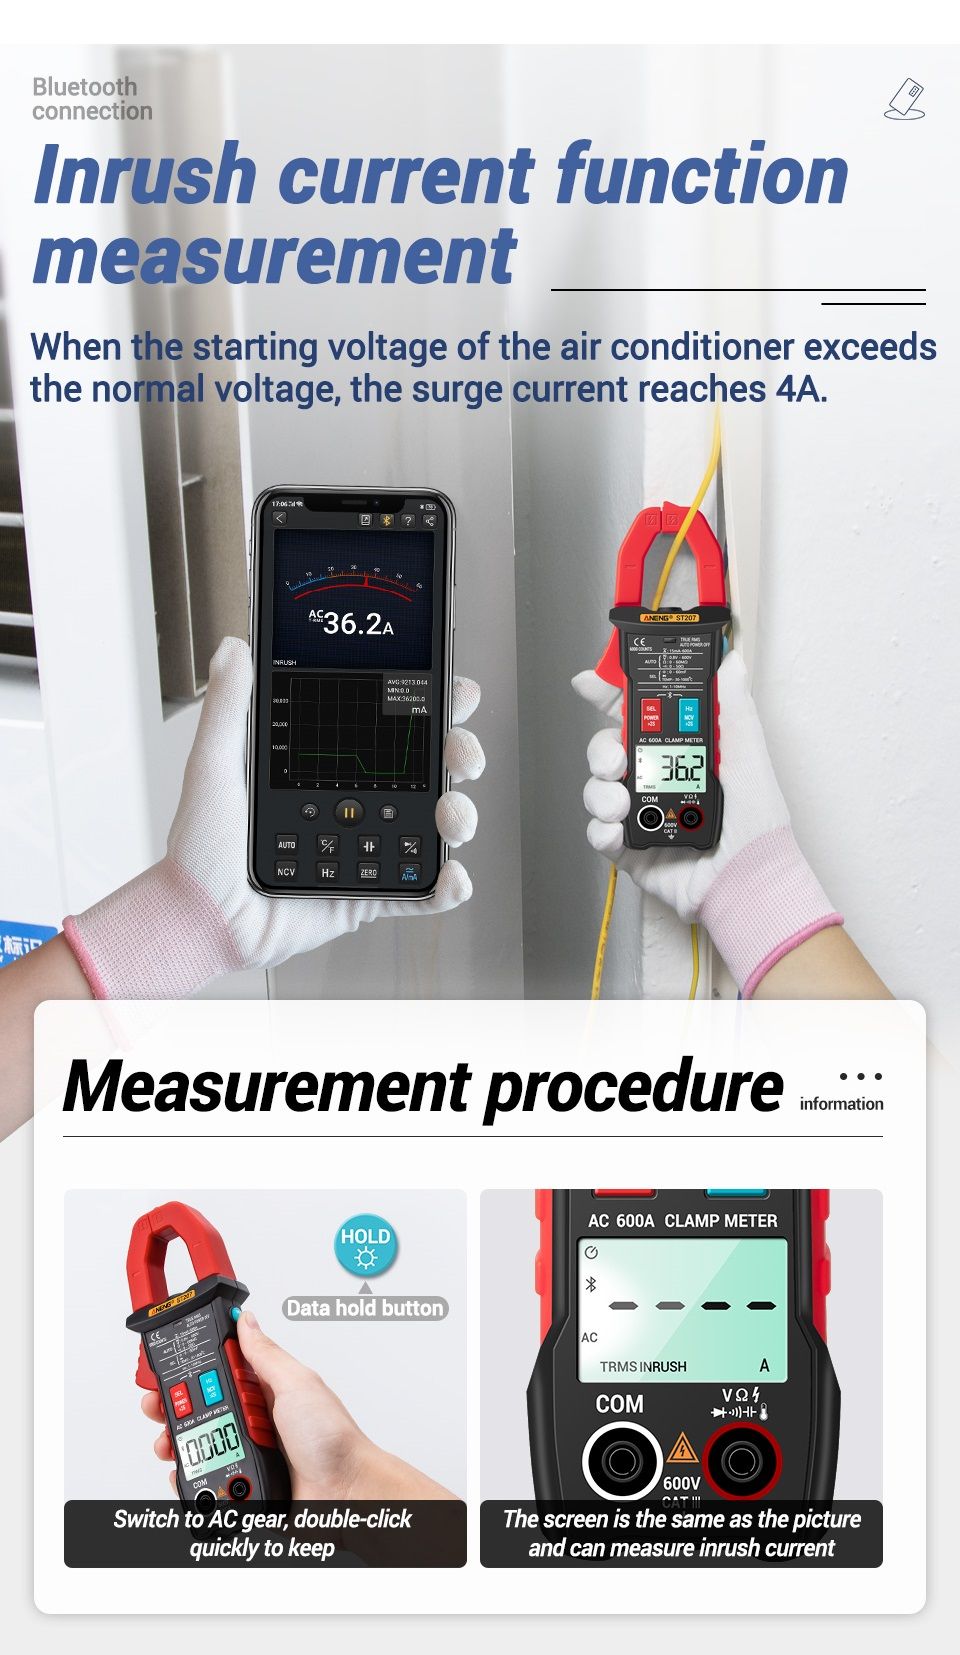 ANENG-ST207-Digital-bluetooth-Multimeter-Clamp-Meter-6000-Counts-True-RMS-DCAC-Voltage-Tester-AC-Cur-1762792